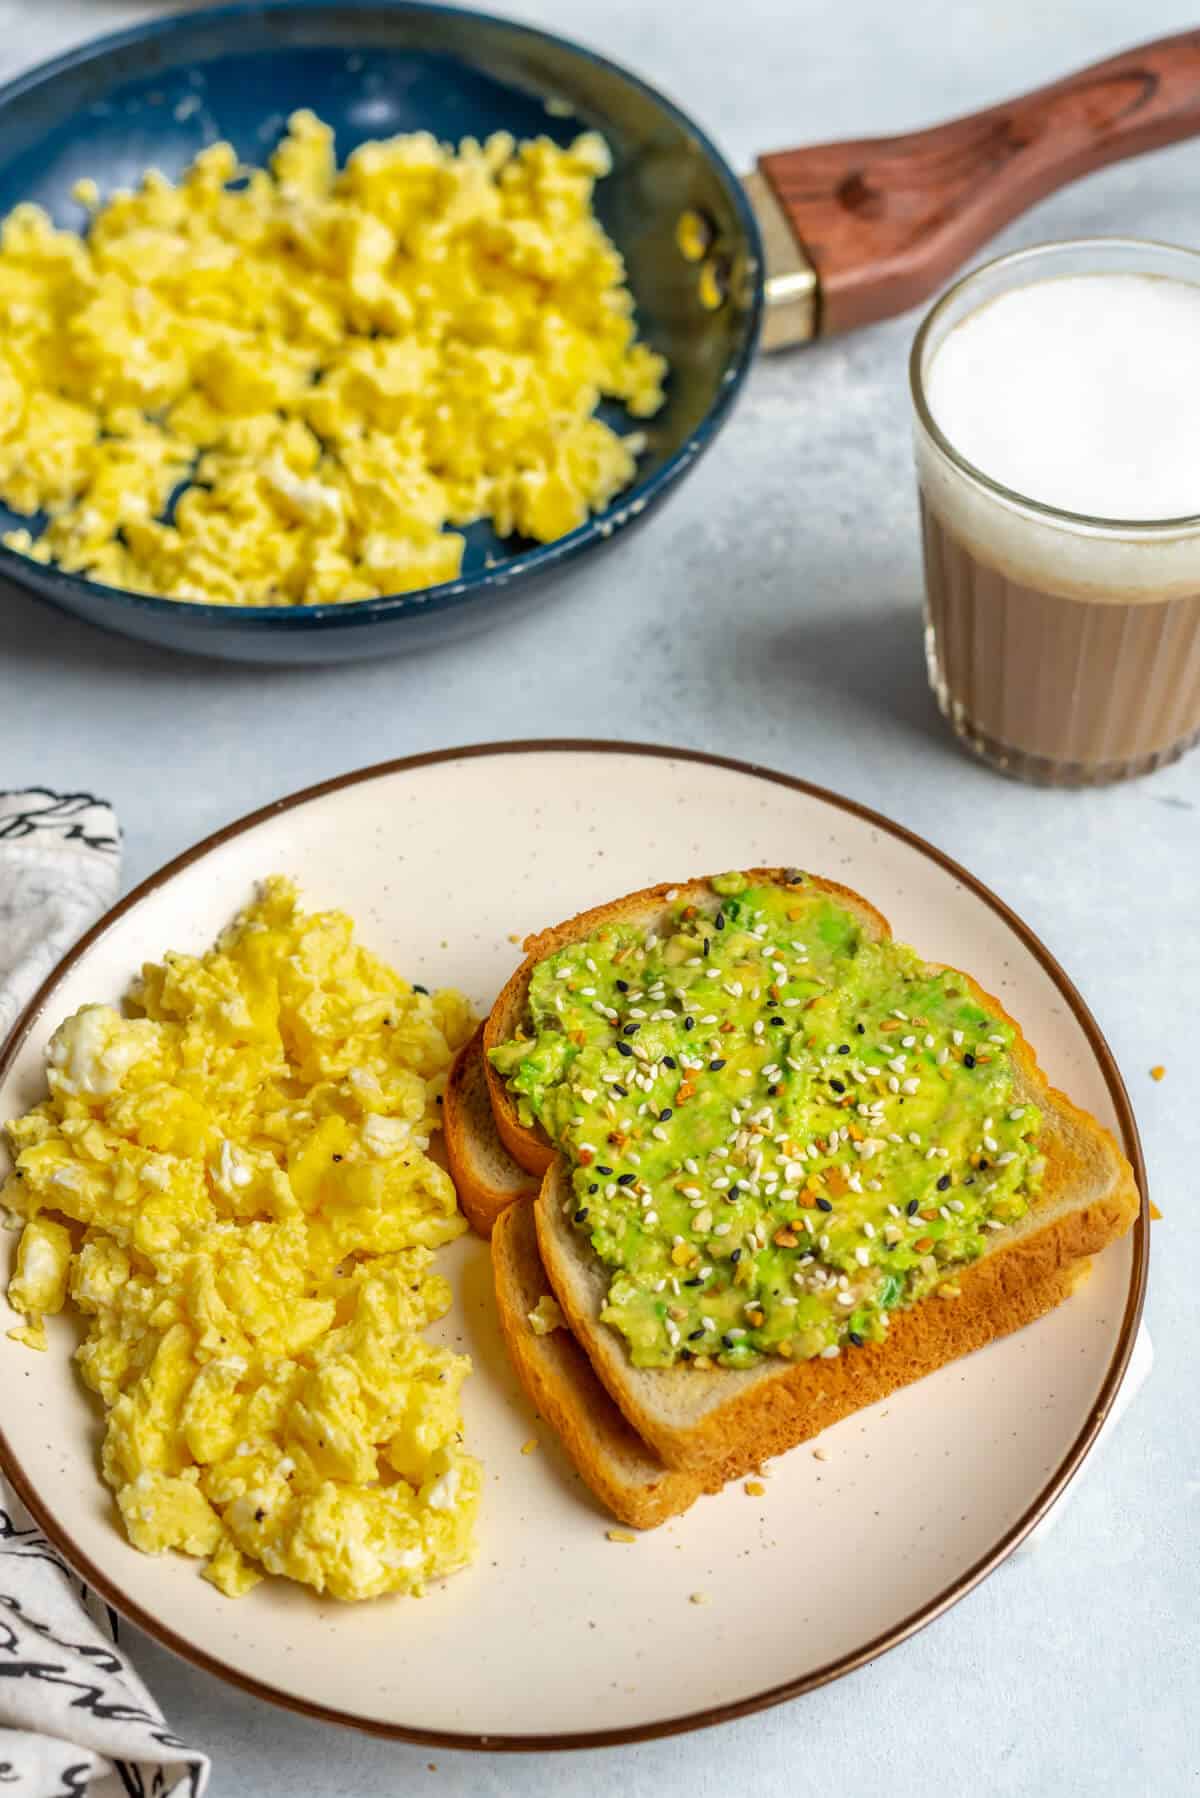 A plate with avocado toast and a side of scrambled eggs.